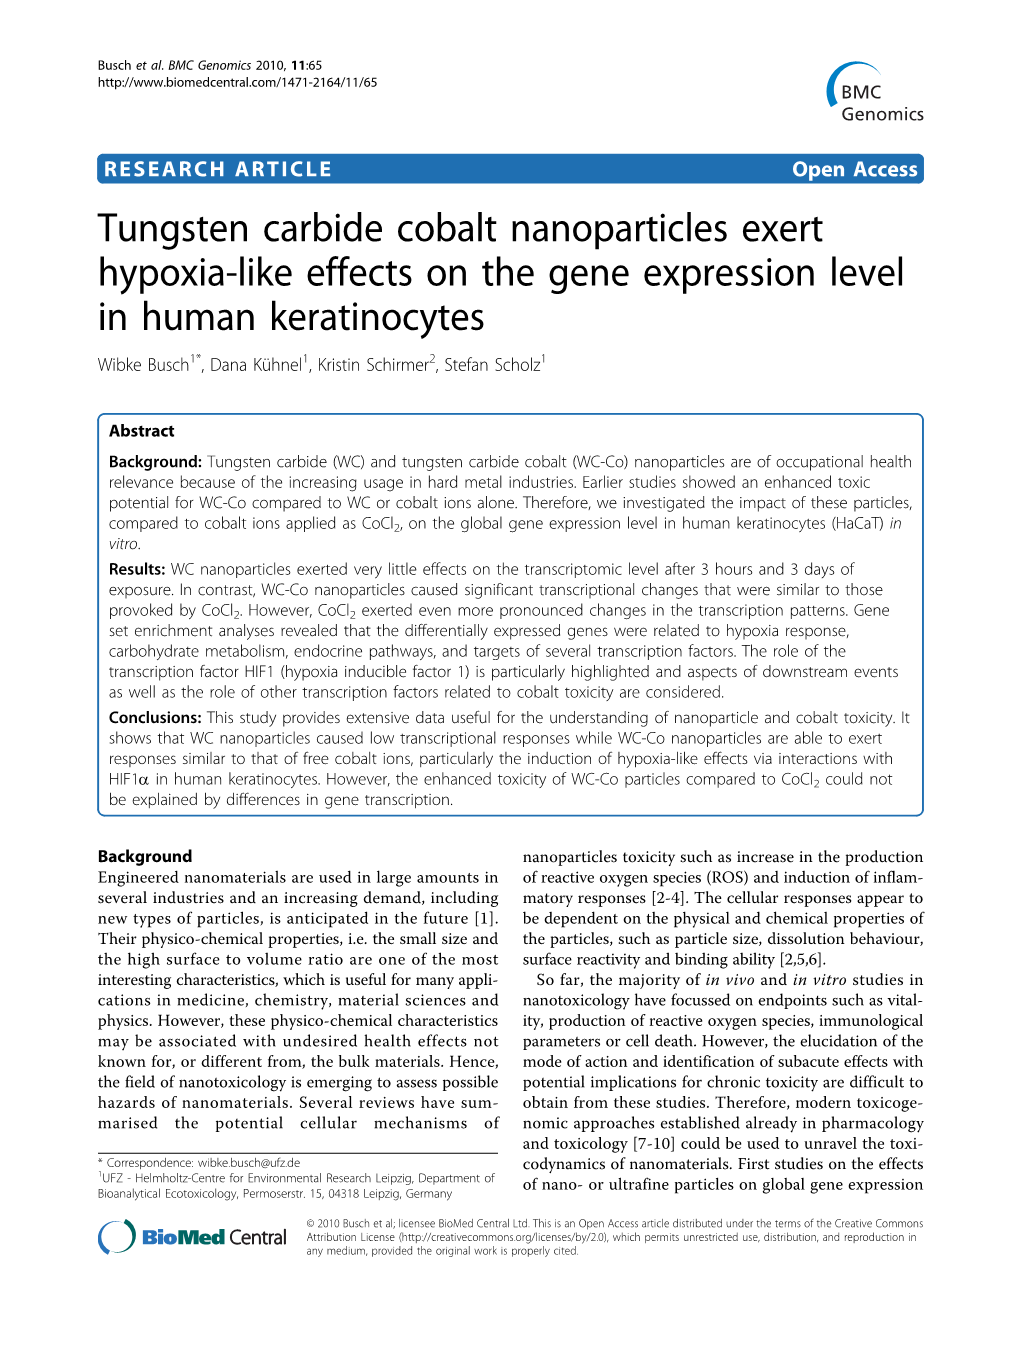 Tungsten Carbide Cobalt Nanoparticles Exert Hypoxia-Like Effects on The